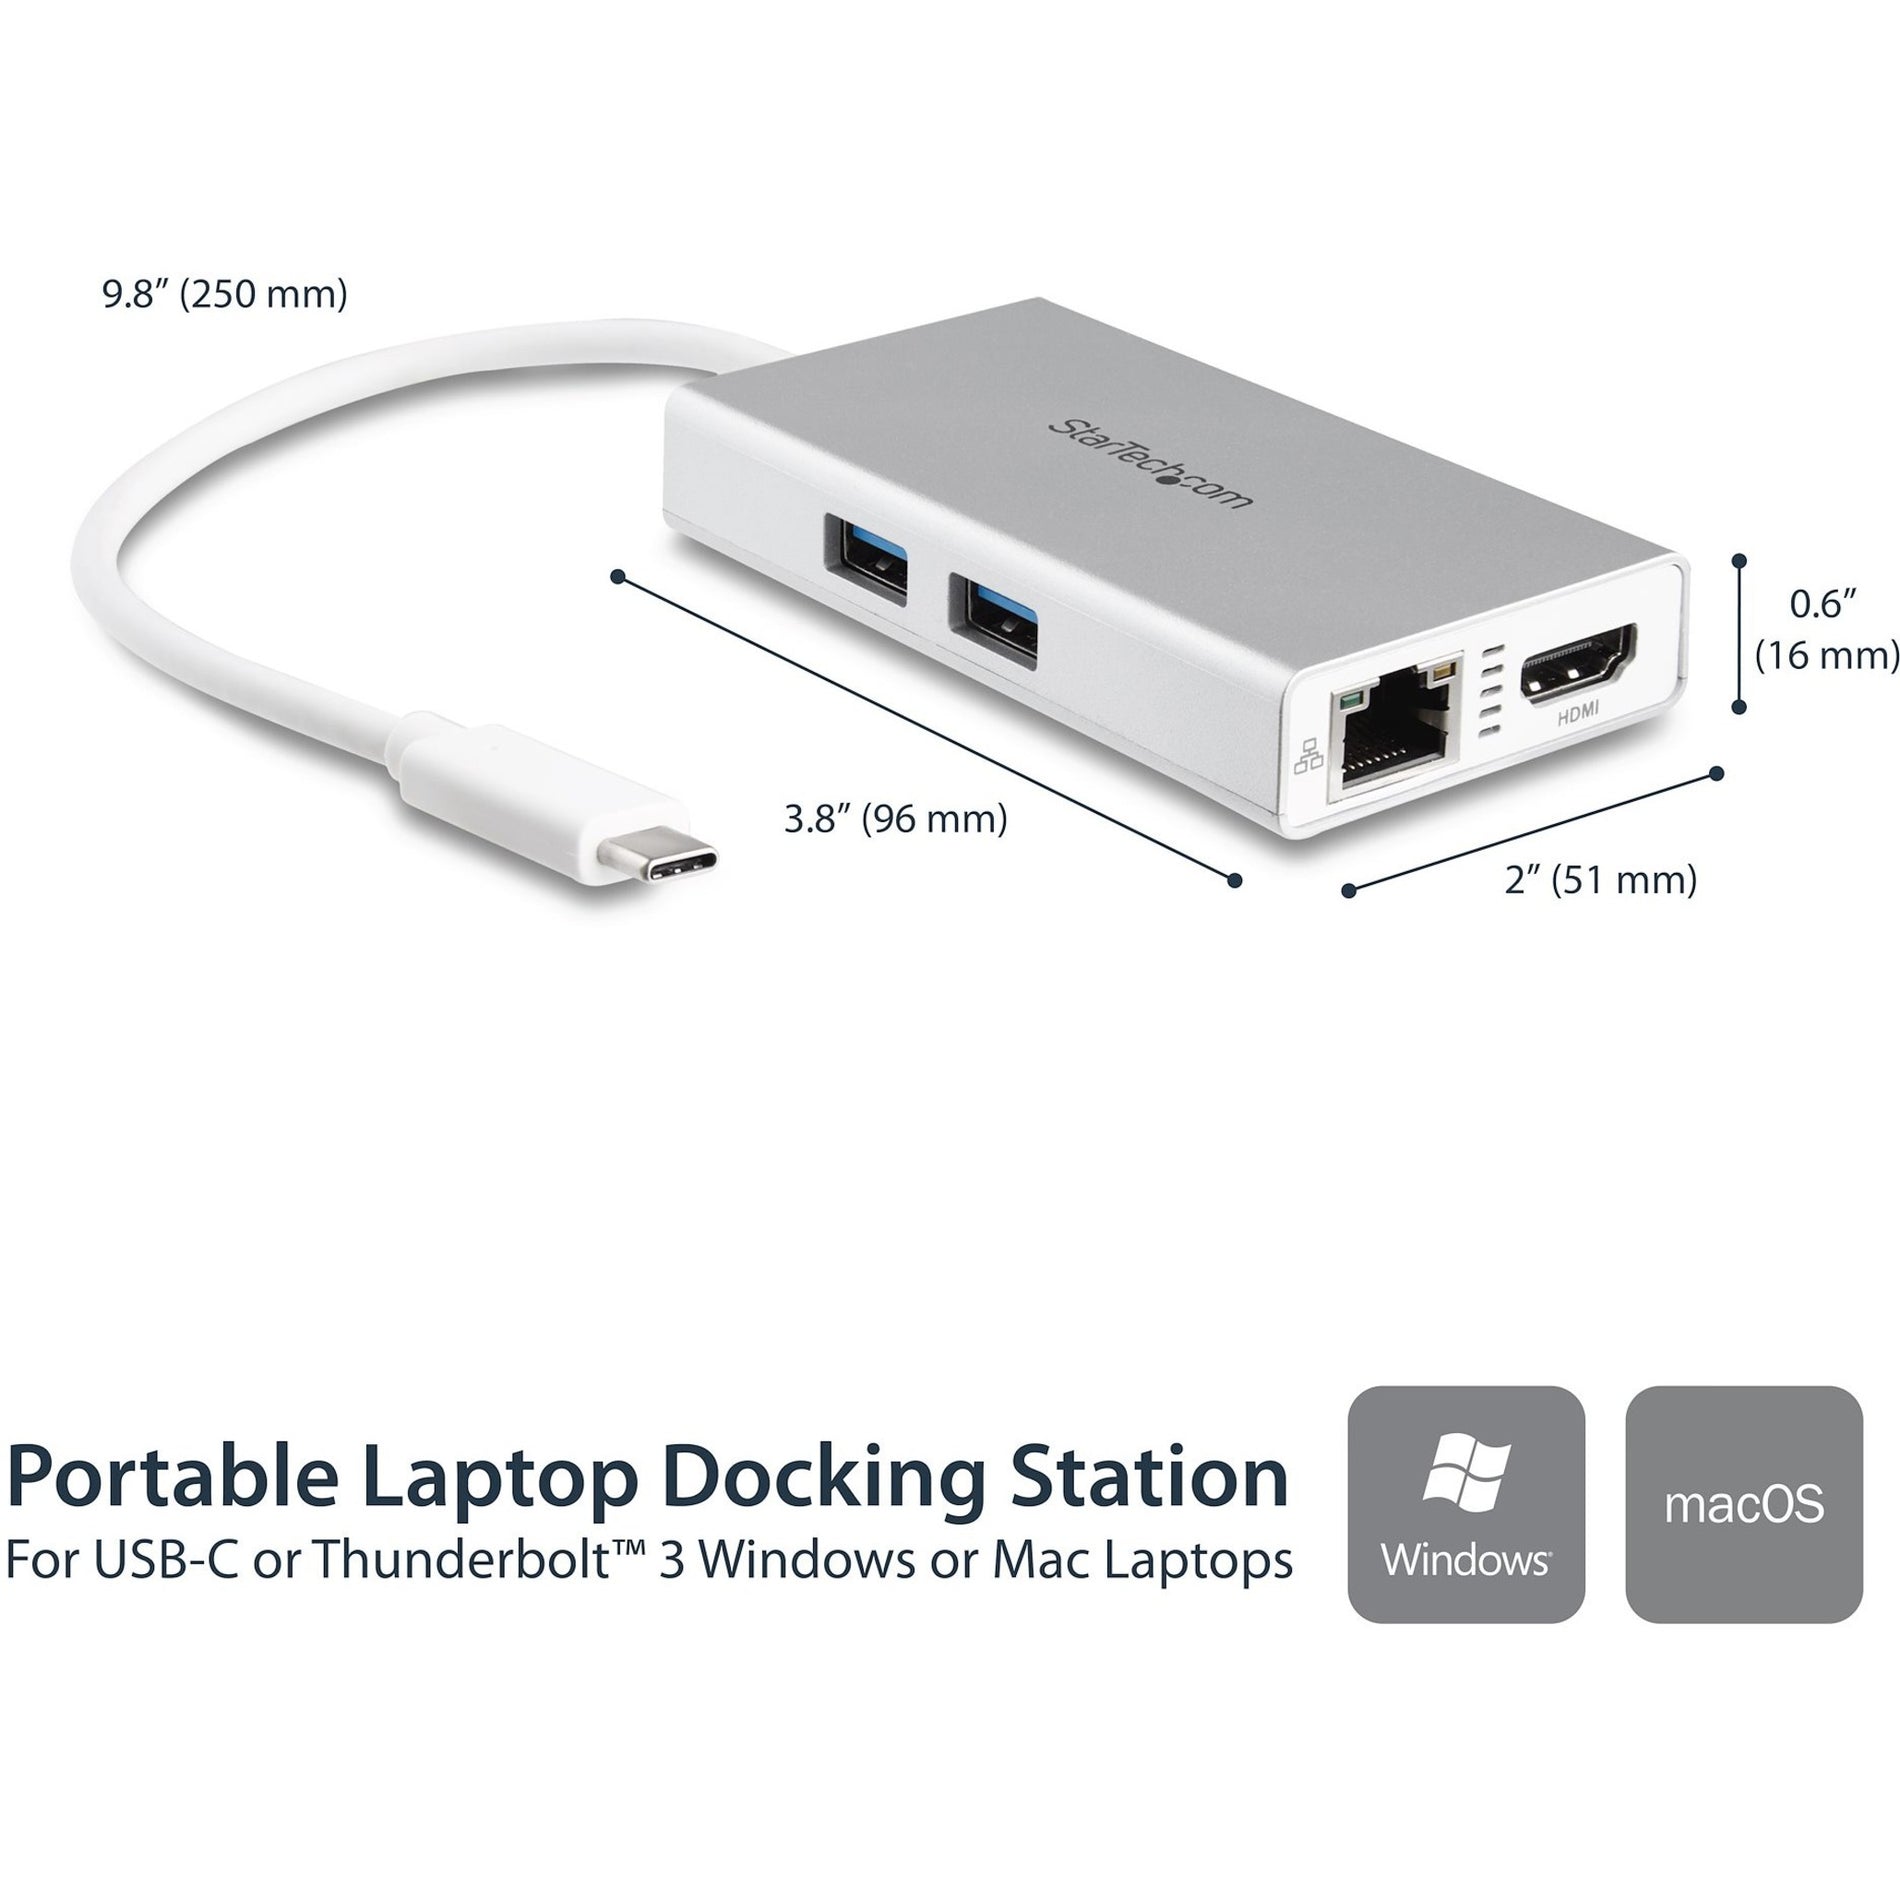 StarTech.com DKT30CHPDW USB-C Multiport Adapter for Laptops - Power Delivery - 4K HDMI - GbE - USB 3.0 - Silver & White, Portable USB-C Adapter